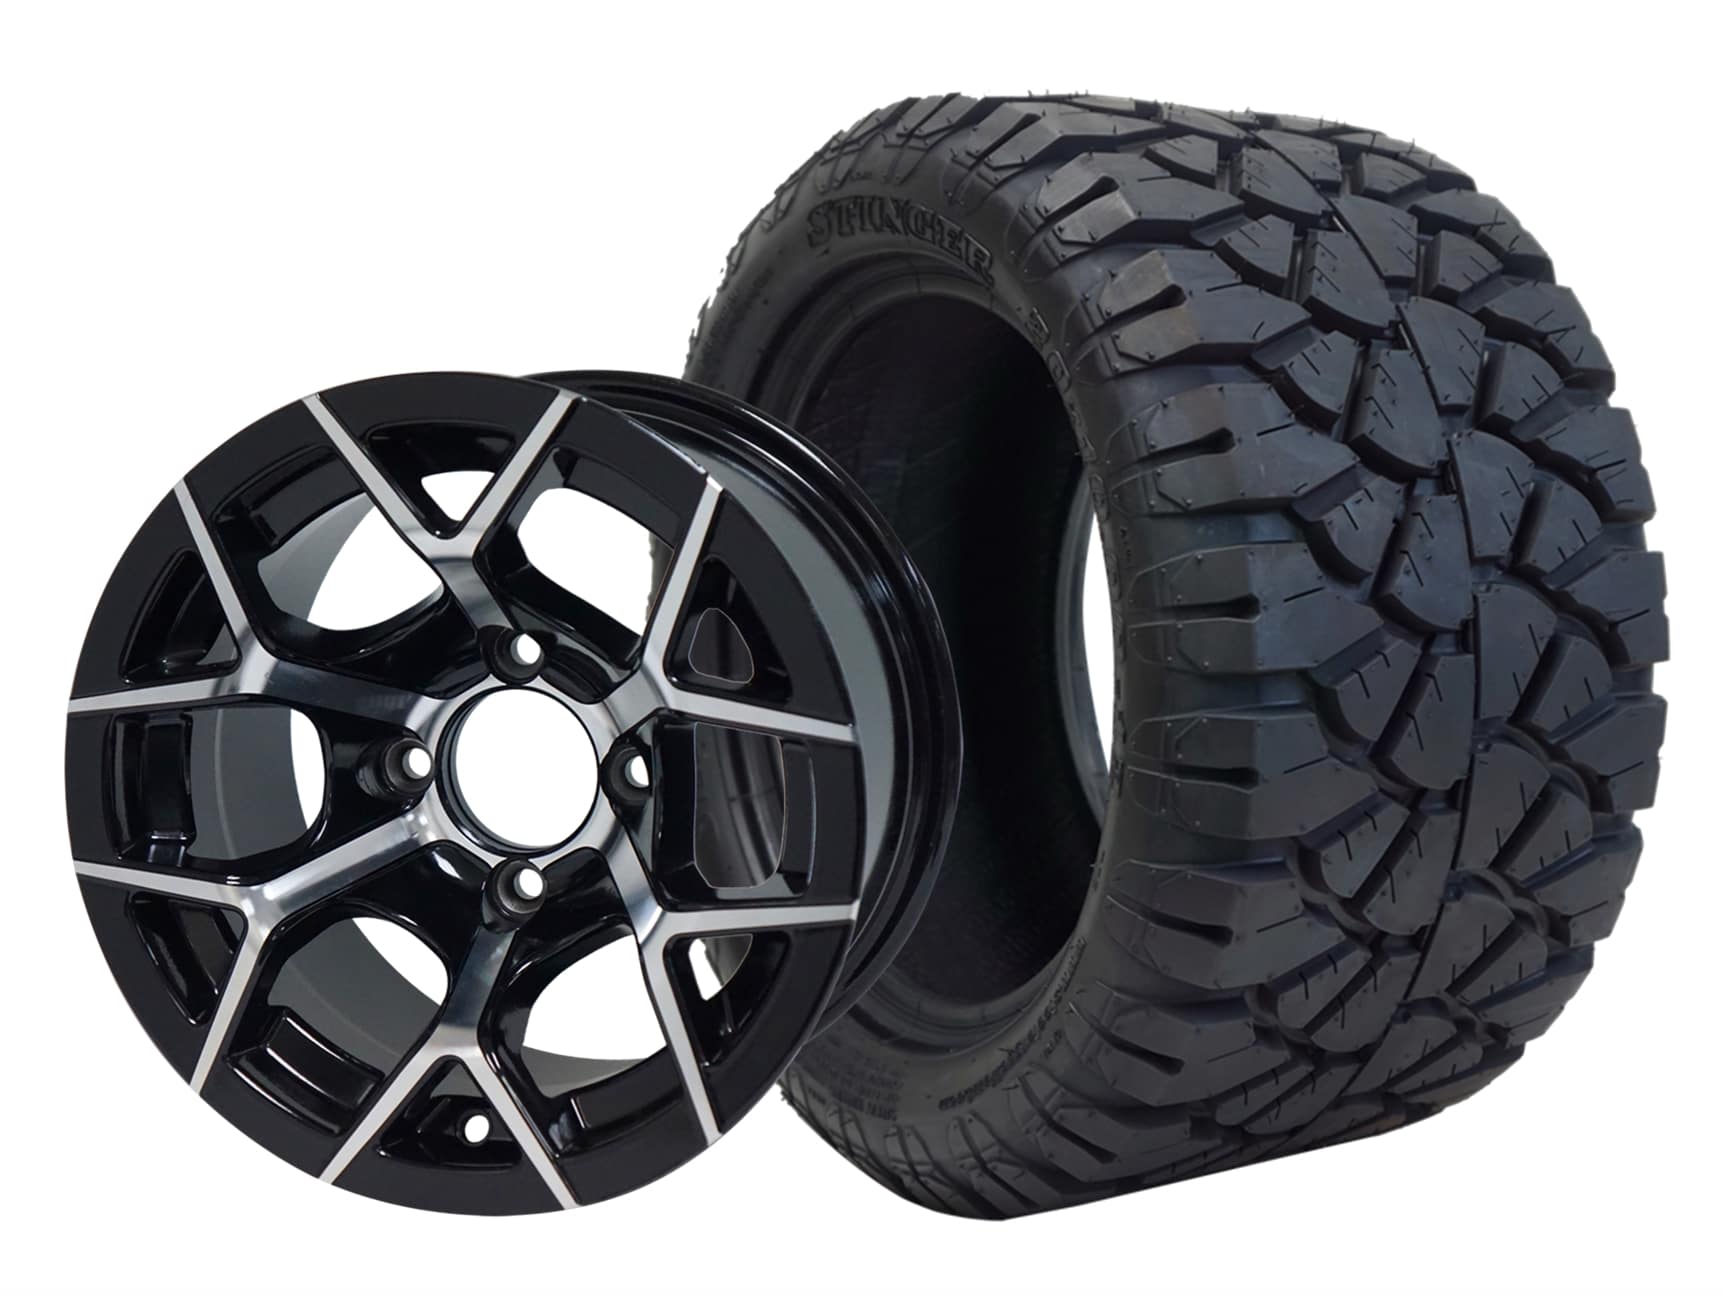 BNDL-TR1204-WH1226-CC0001-LN0001 12″ RALLY MACHINED/BLACK WHEEL – ALUMINUM ALLOY / STEELENG 20″X10″-12″ STINGER ALL TERRAIN TIRE DOT APPROVED